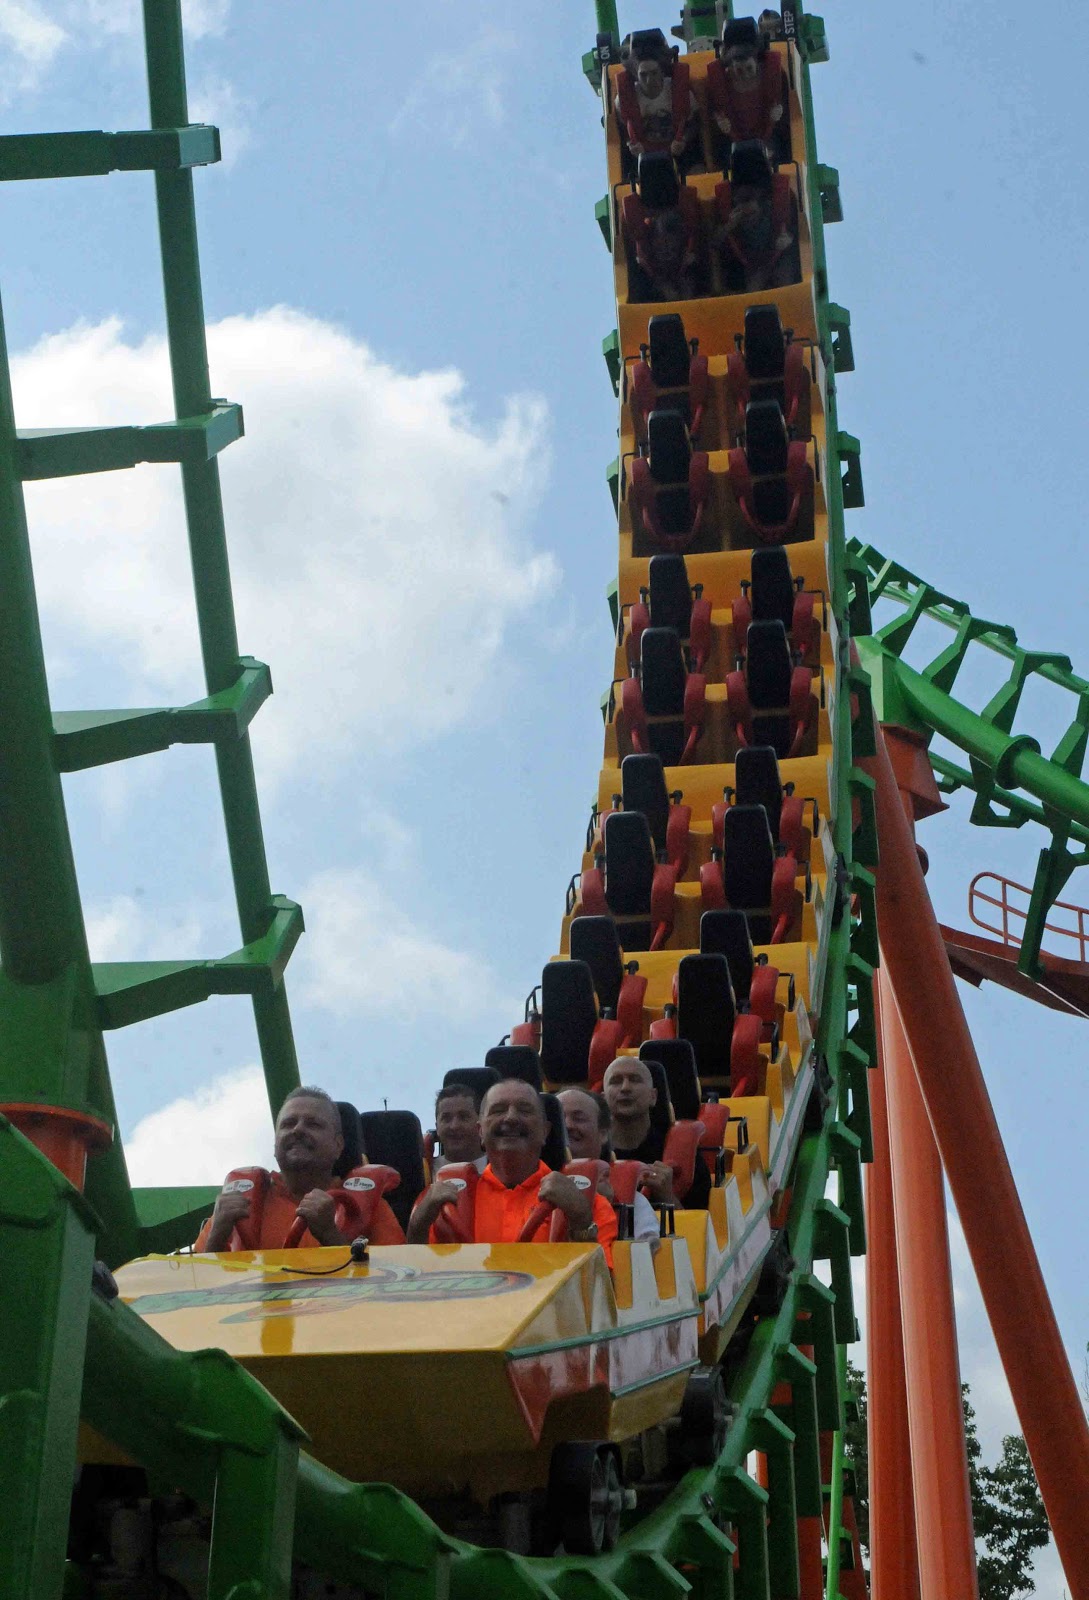 NewsPlusNotes: Scott And Carol Present - The Boomerang at Six Flags St Louis